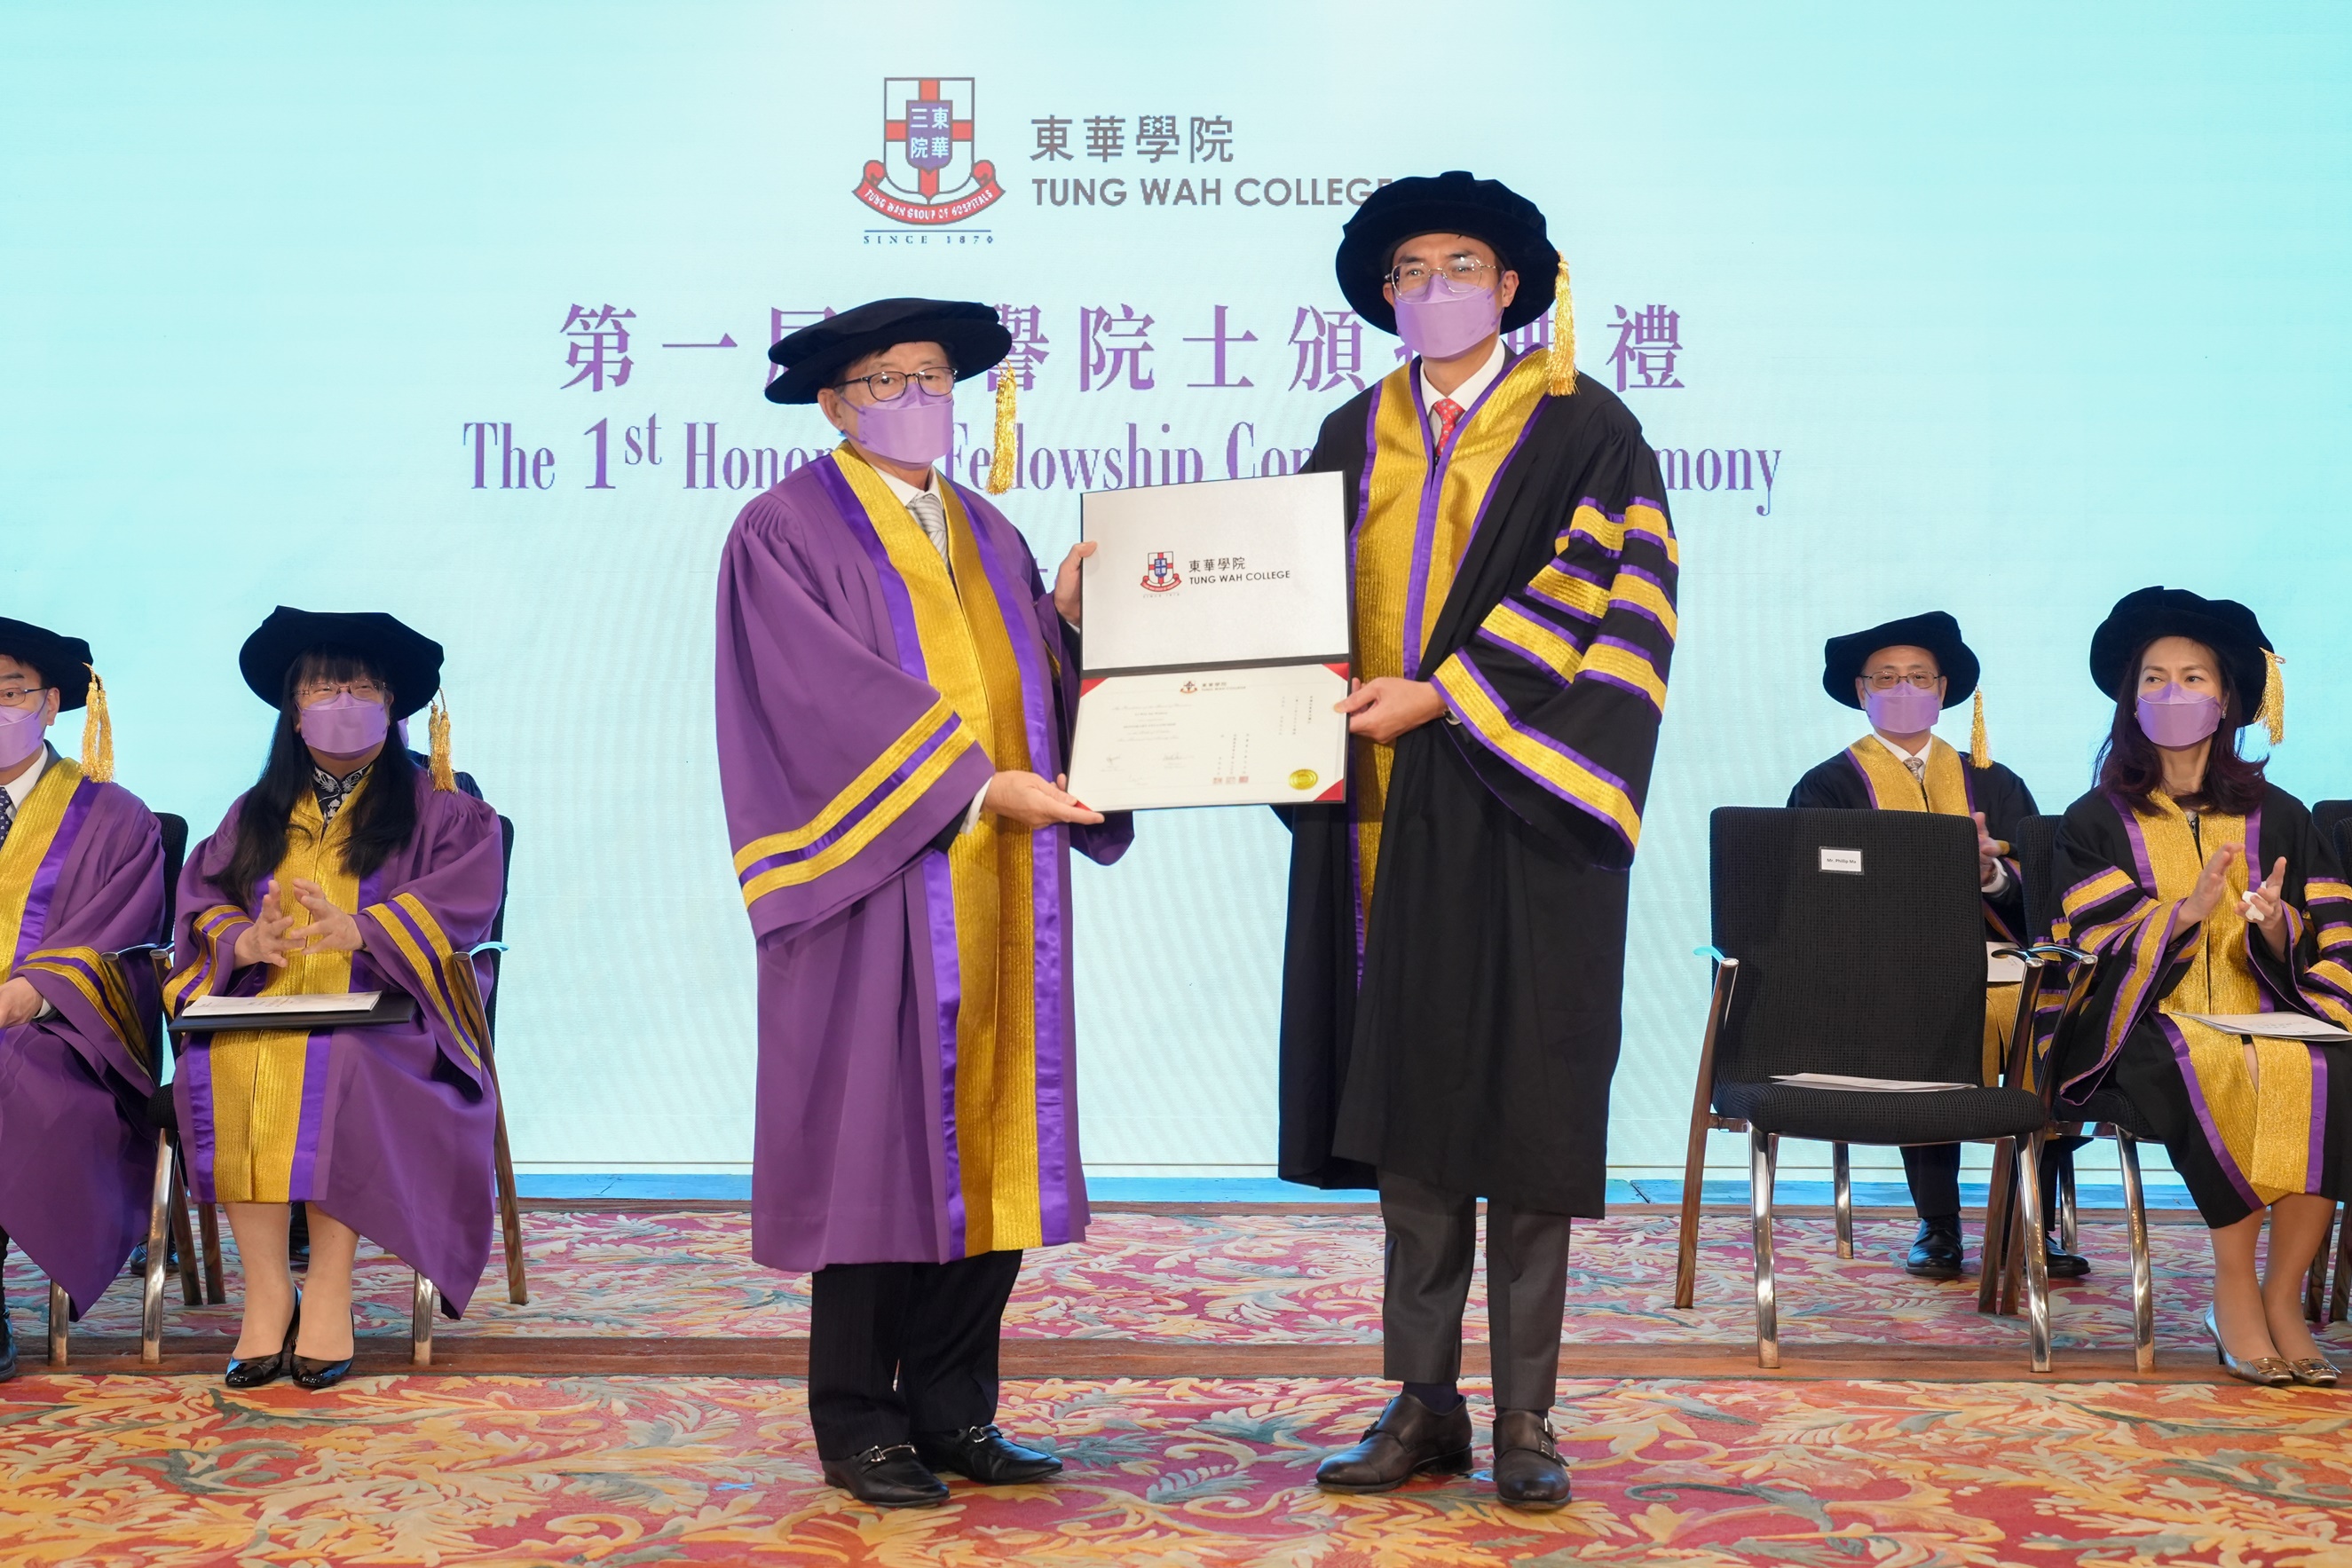 Dr. Joseph Lee Chung Tak (left) is conferred the Honorary Fellowship.